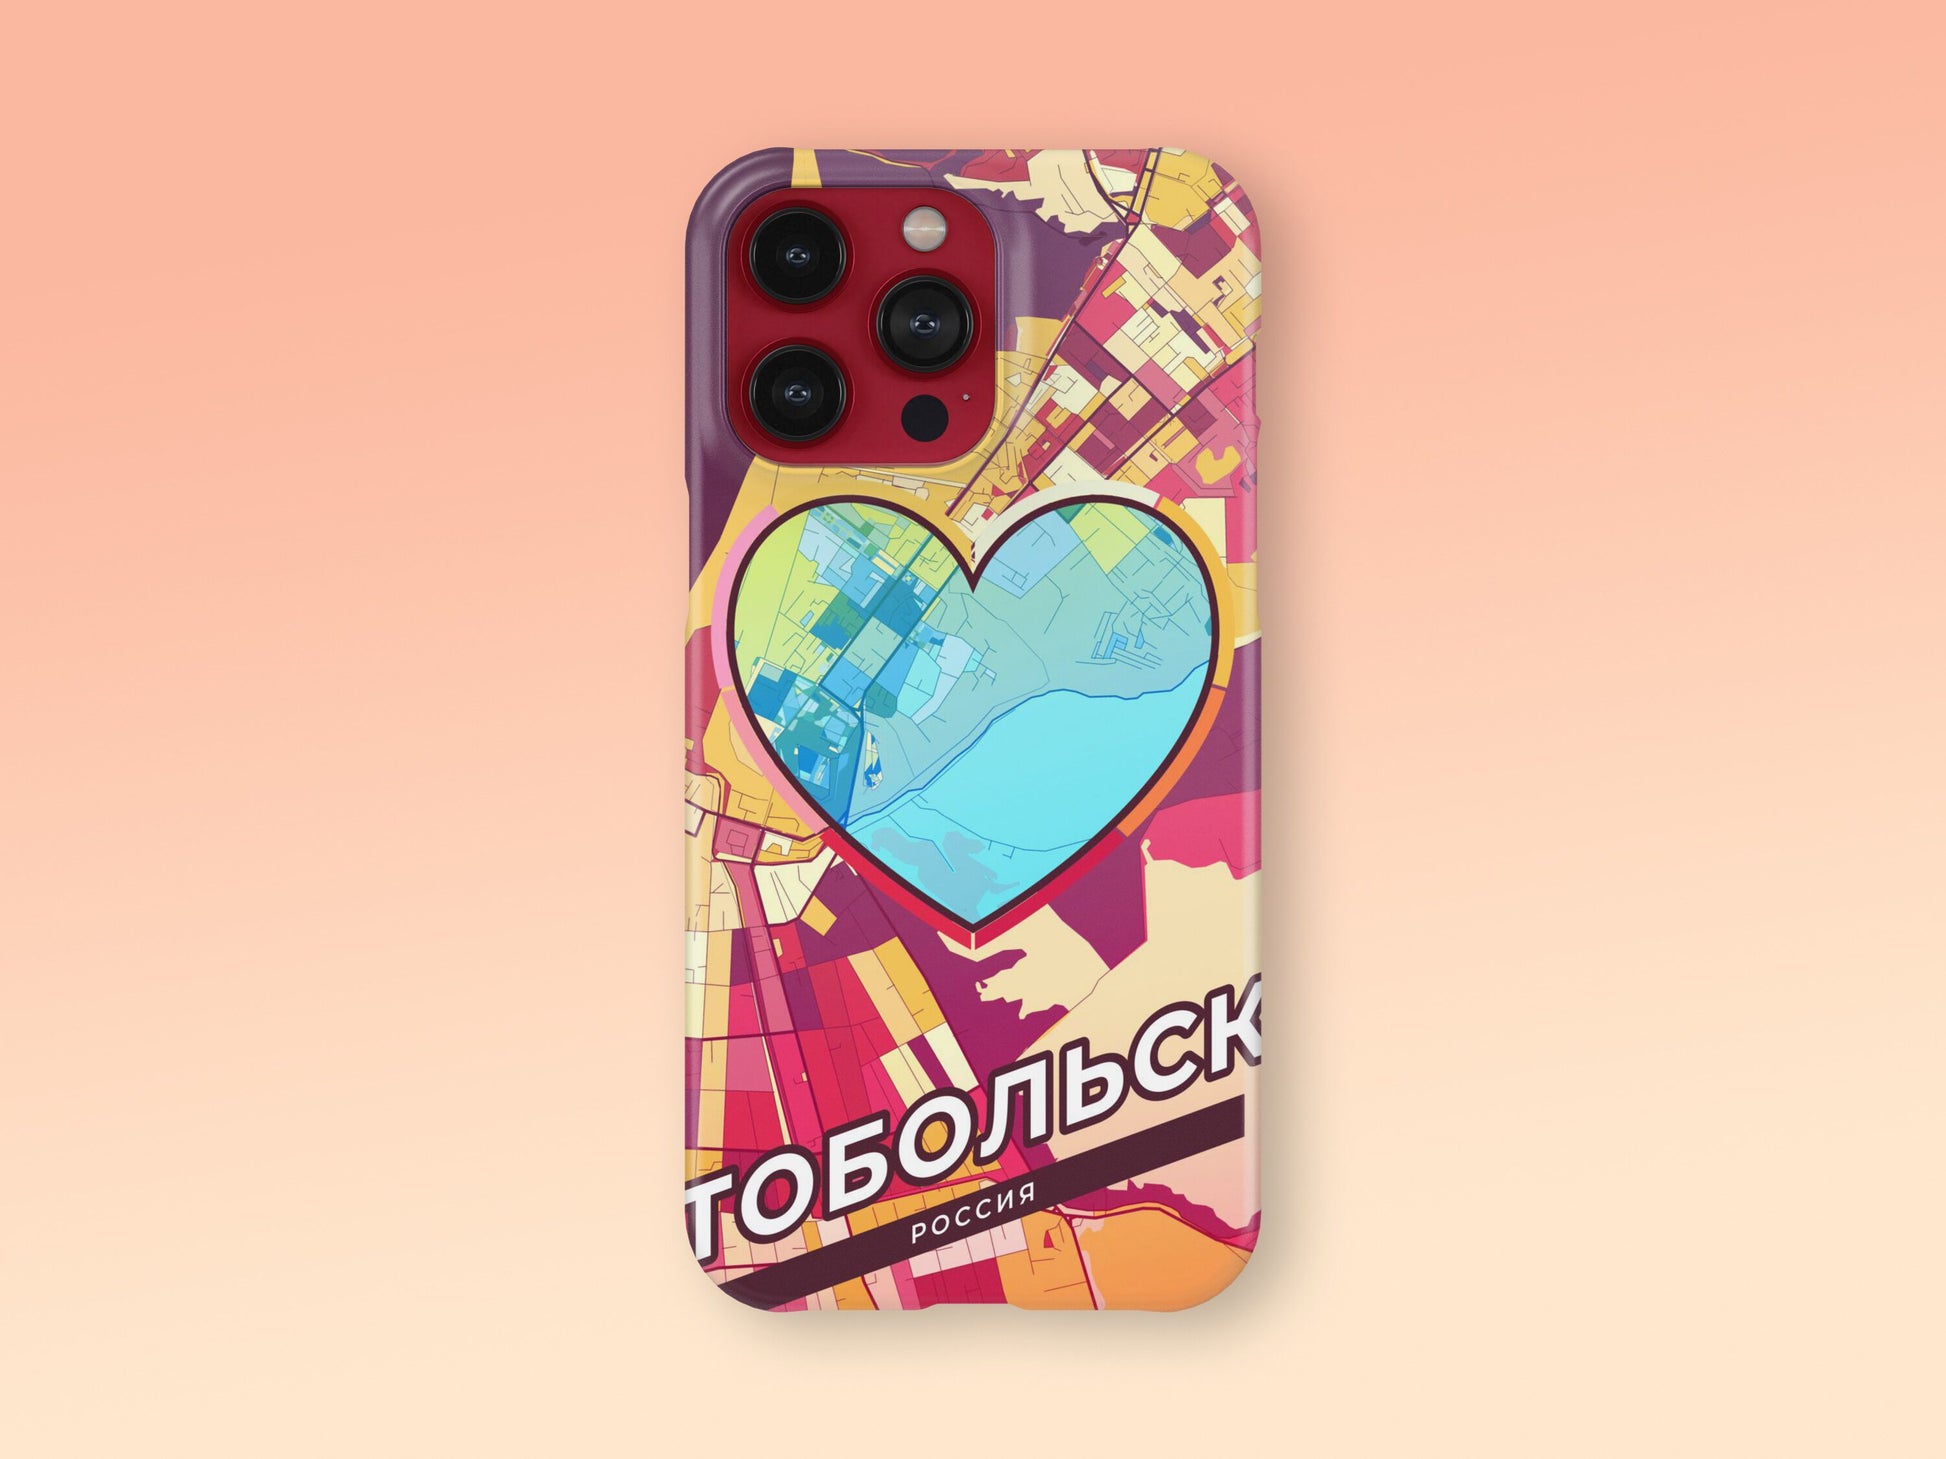 Tobolsk Russia slim phone case with colorful icon 2